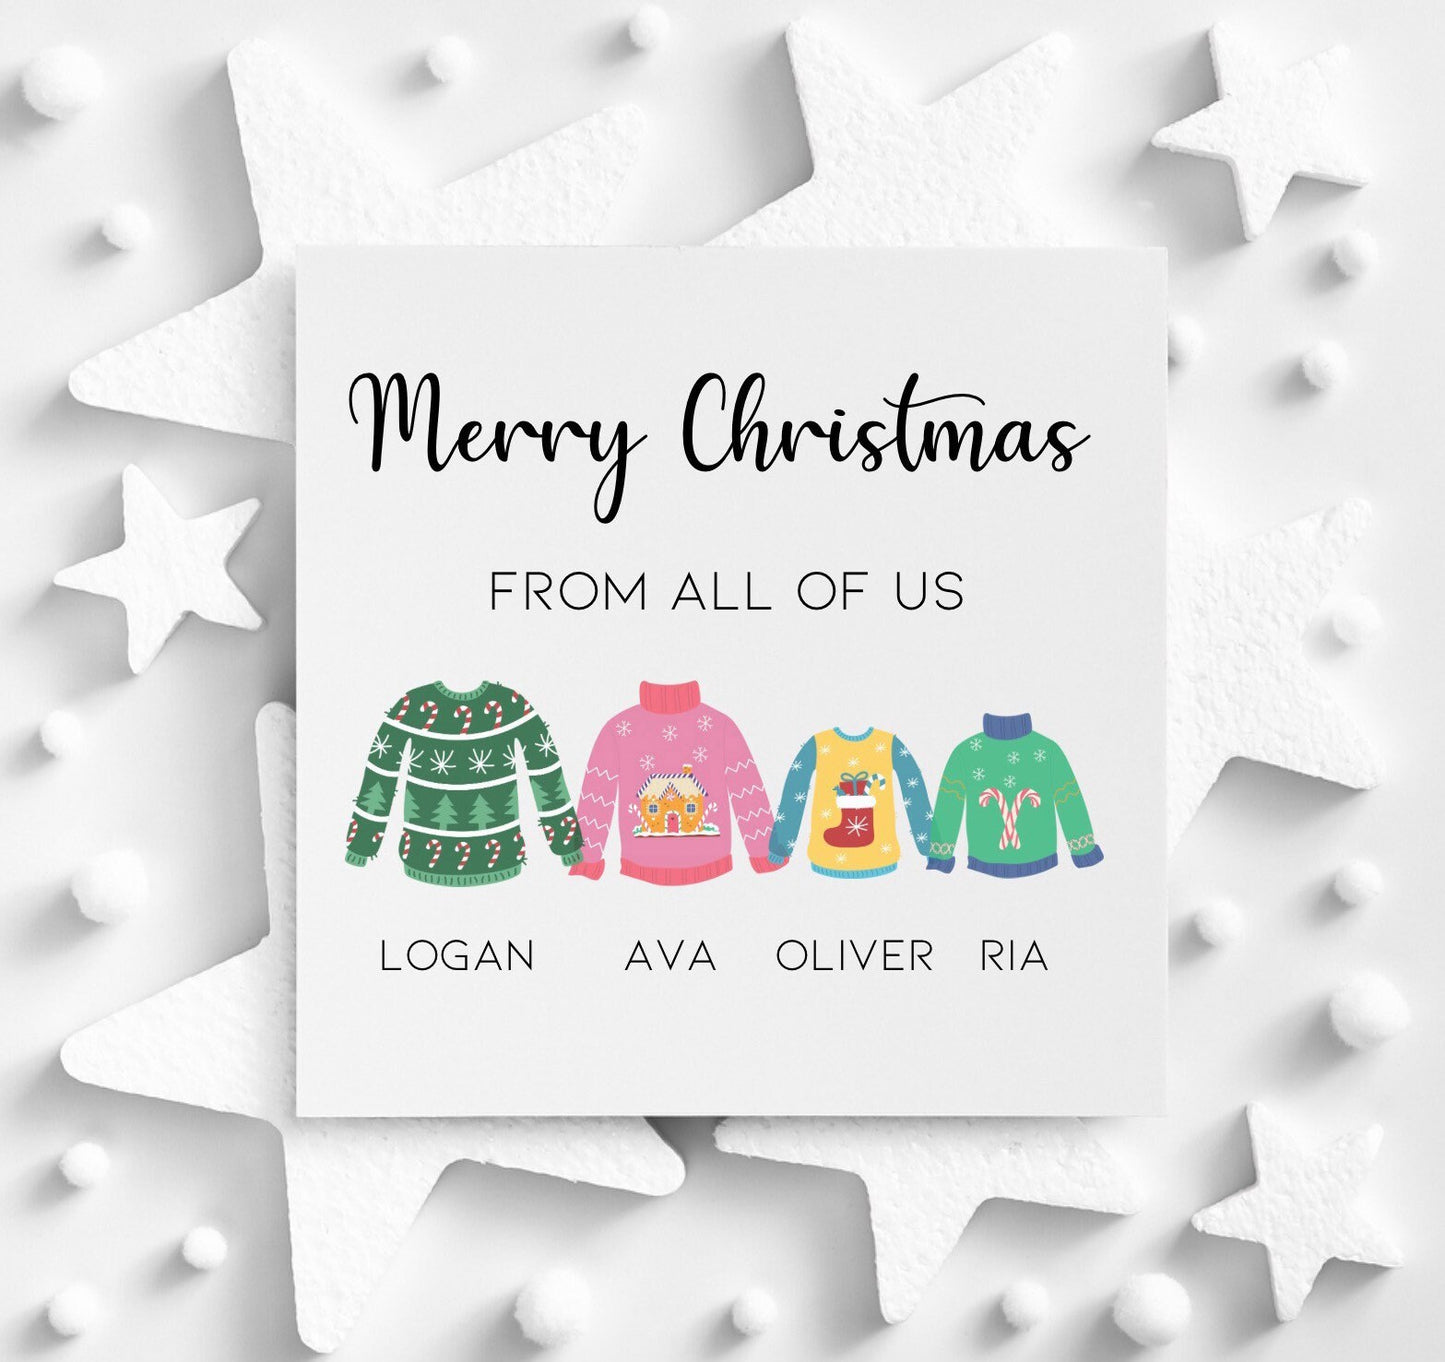 Merry Christmas from all of us, personalised family Xmas jumper cards for relatives, neighbours and friends